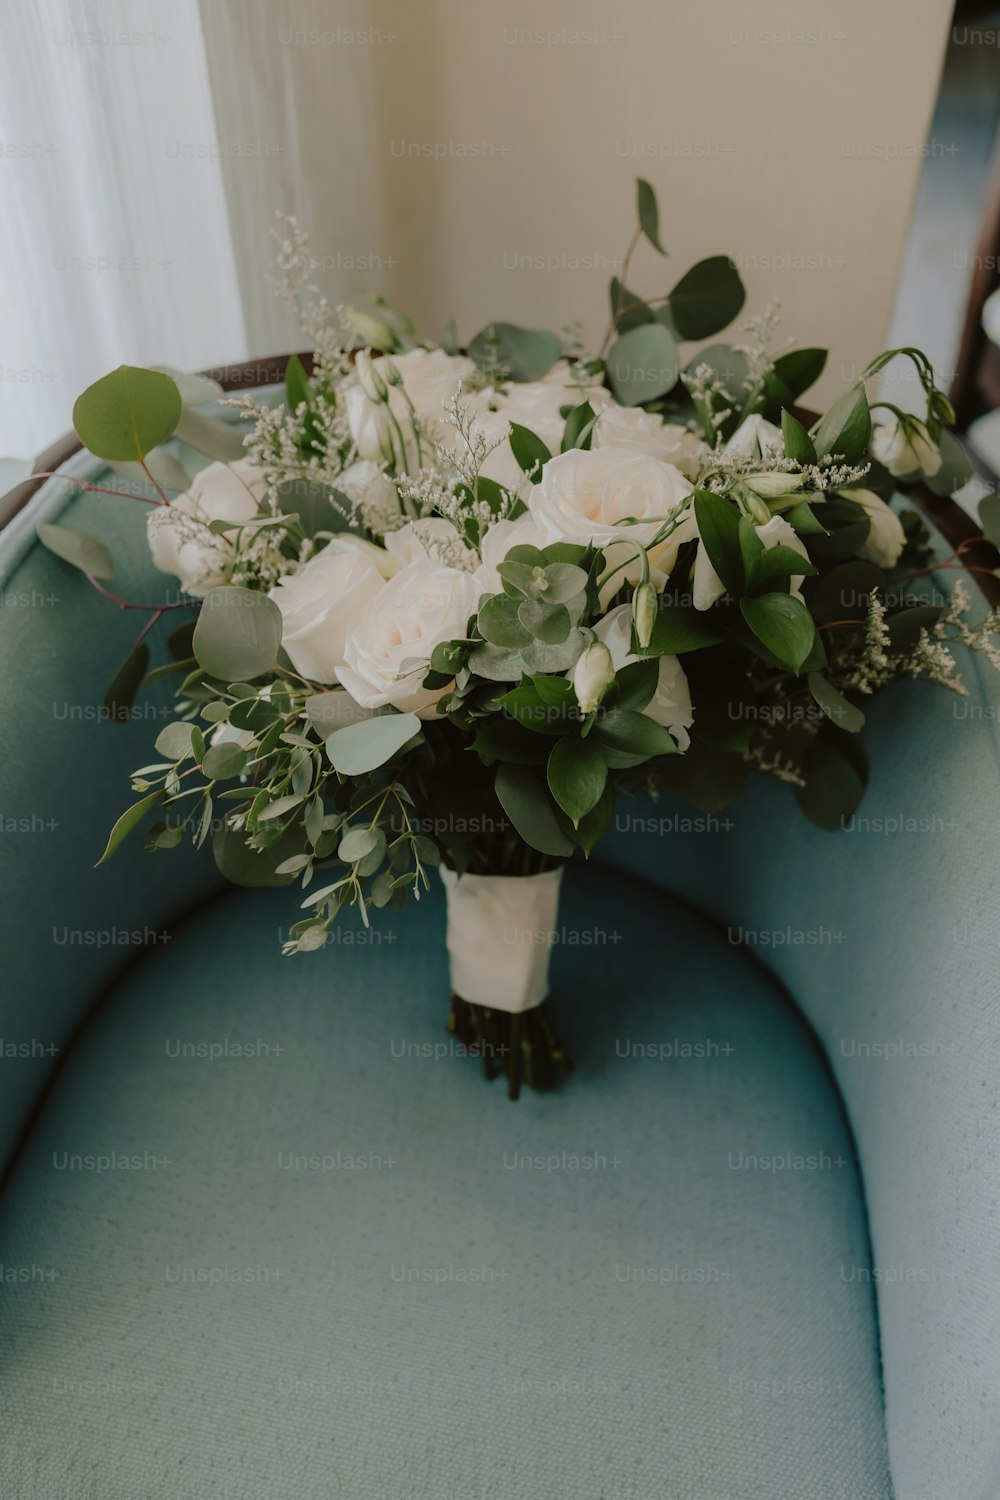 a bouquet of flowers sitting on a blue couch